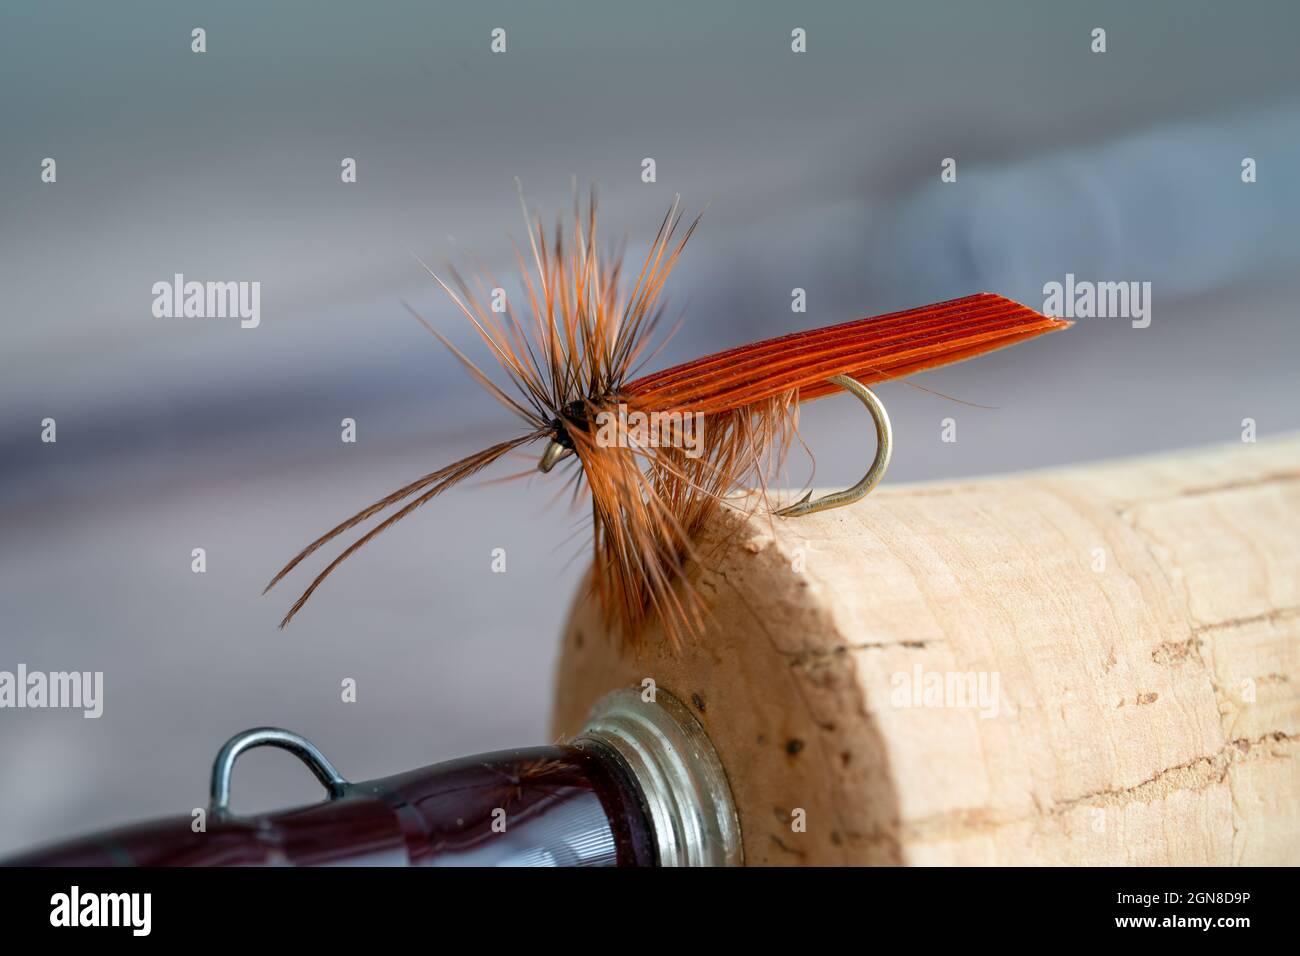 Close up of a Caddis dry fly fishing fly hooked into the handle of a fly rod with hook eye and rod blank Stock Photo